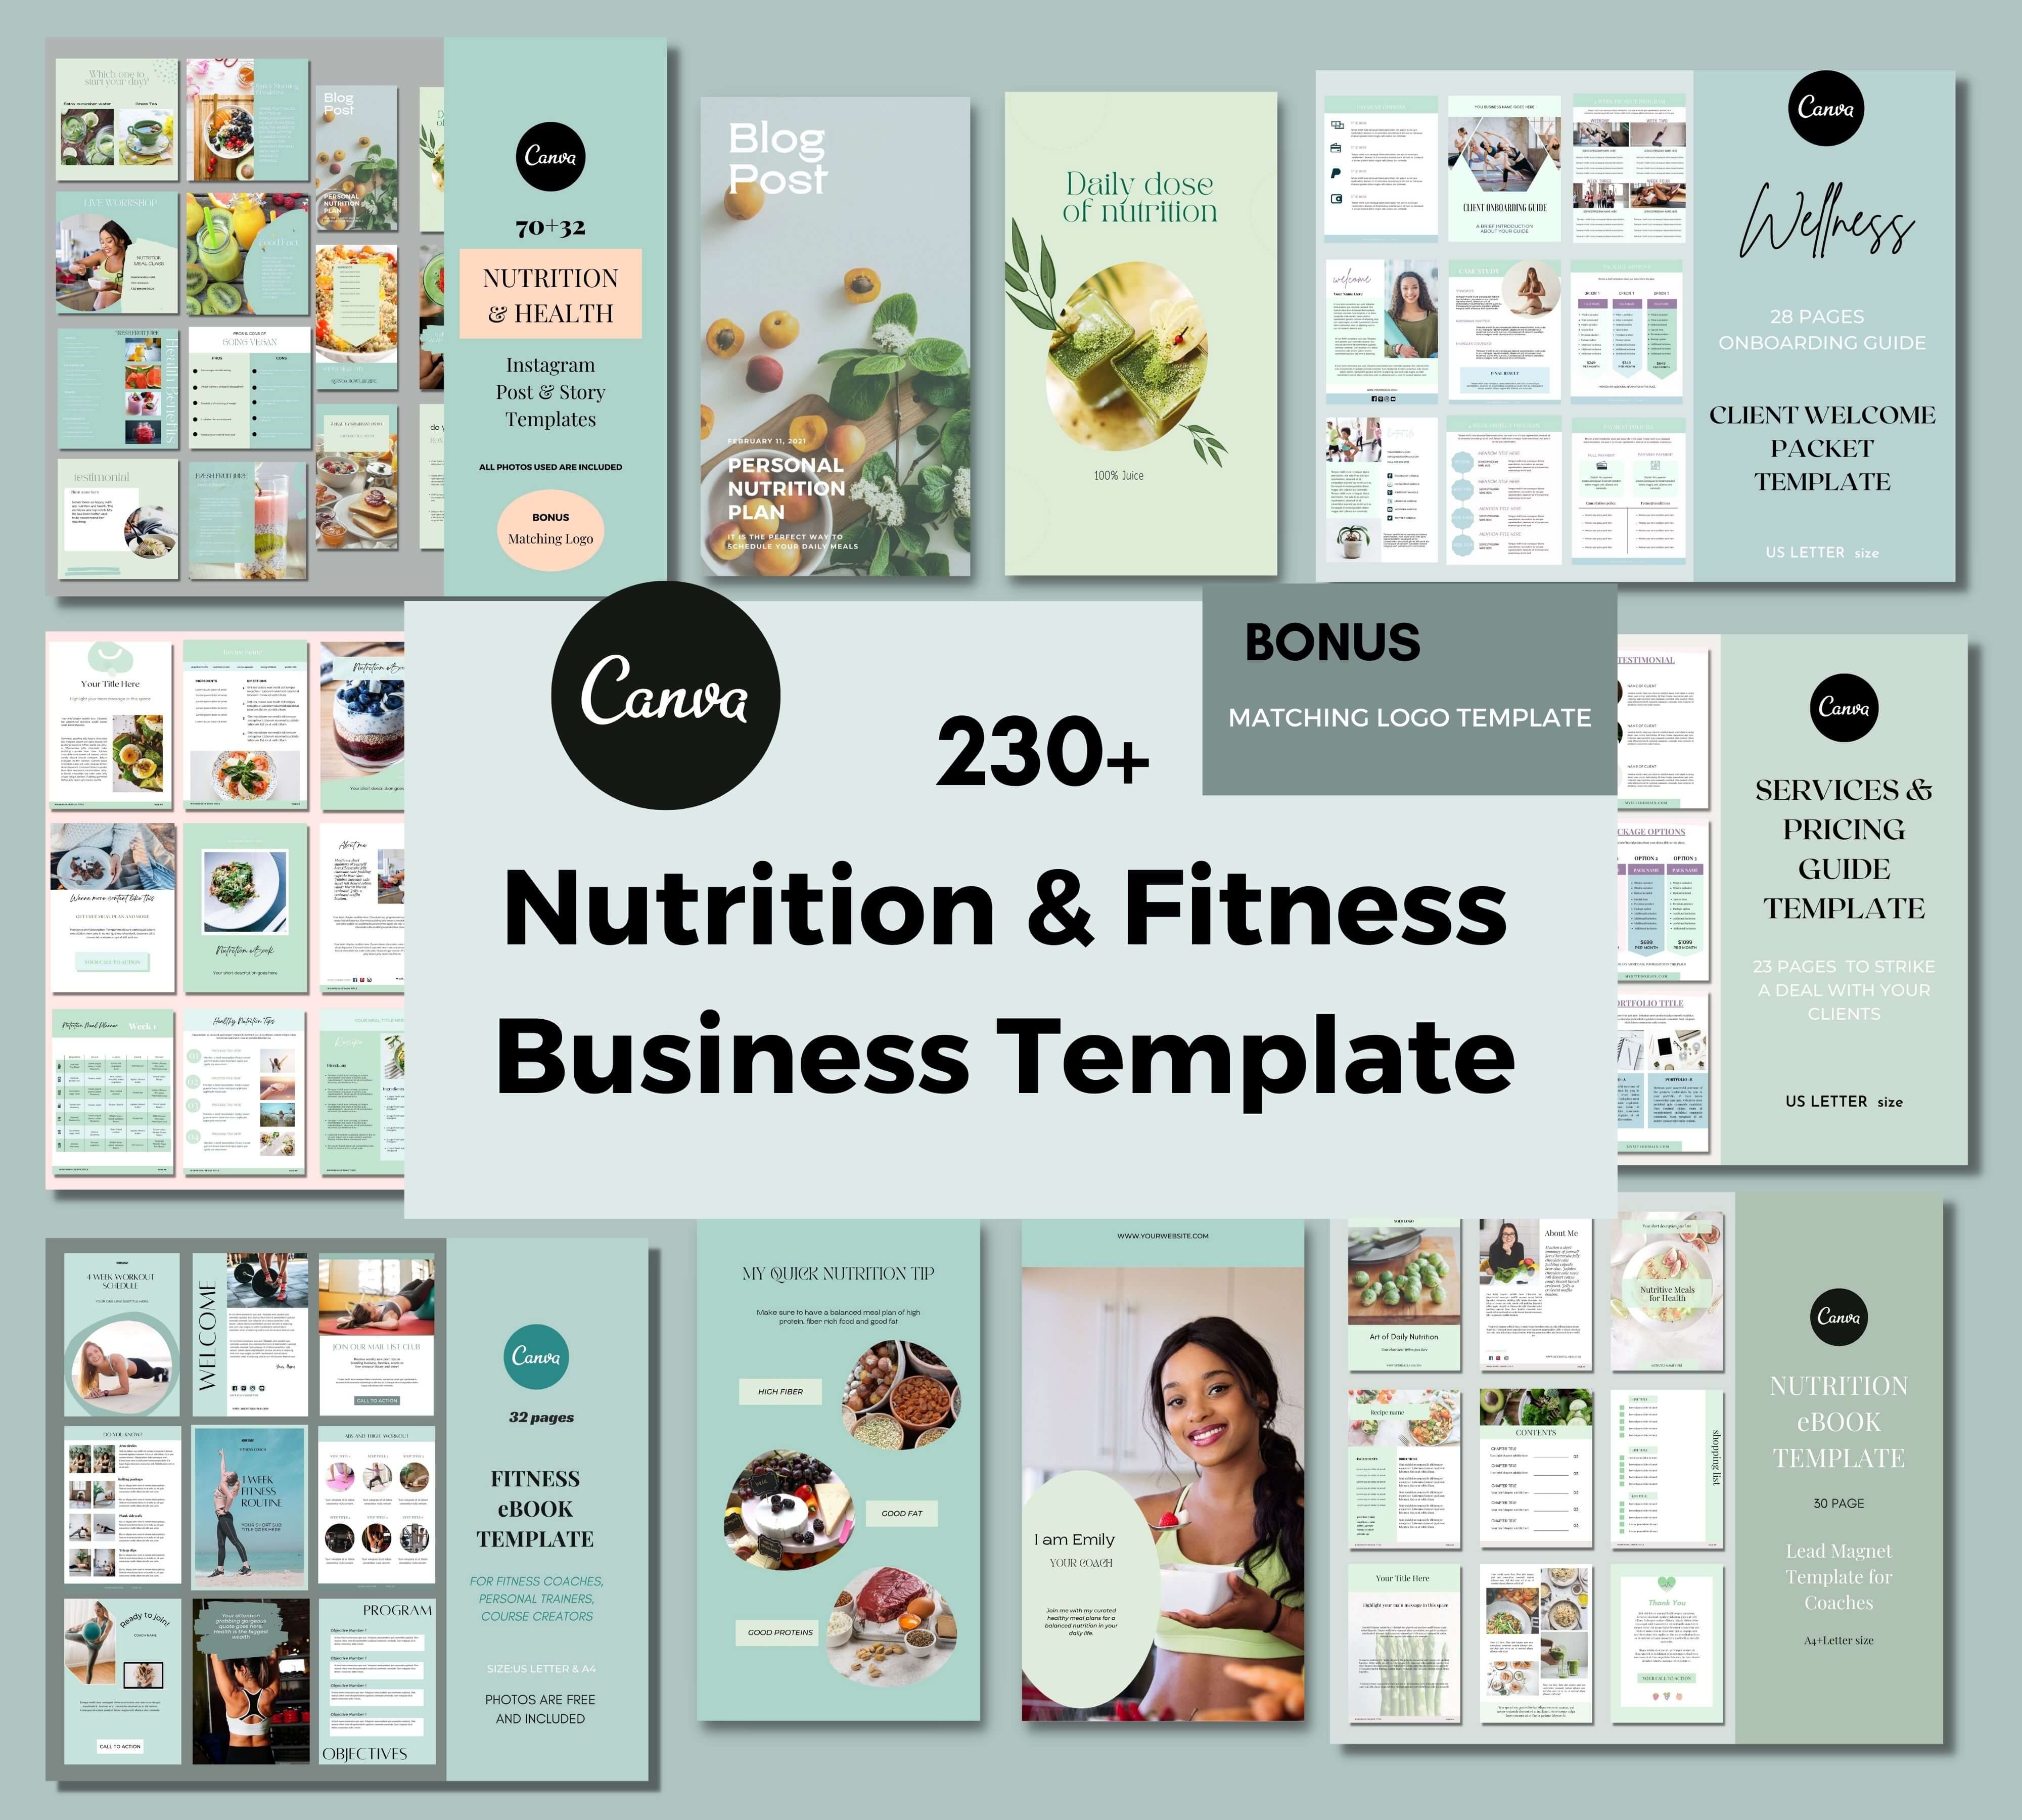 nutritionist-canva-business-template-nutrition-fitness-coach